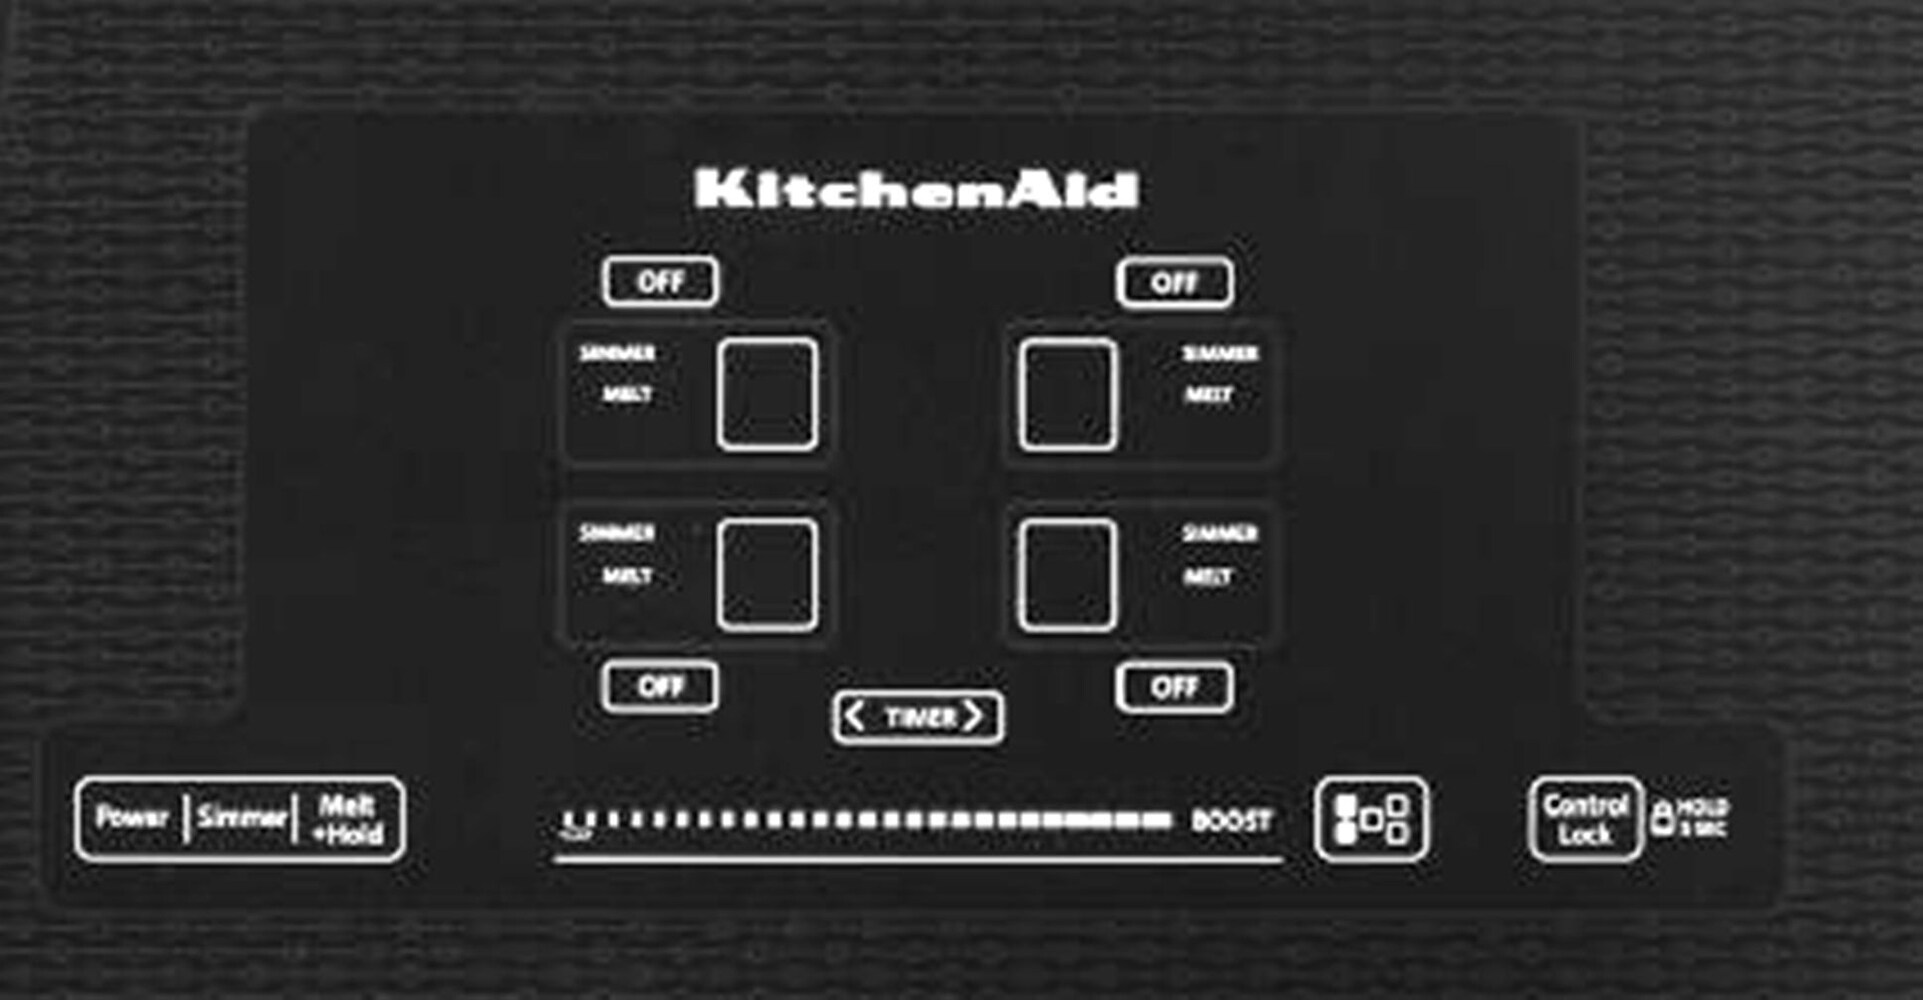 KitchenAid KICU509XBL 30-Inch Induction Cooktop Review - Reviewed